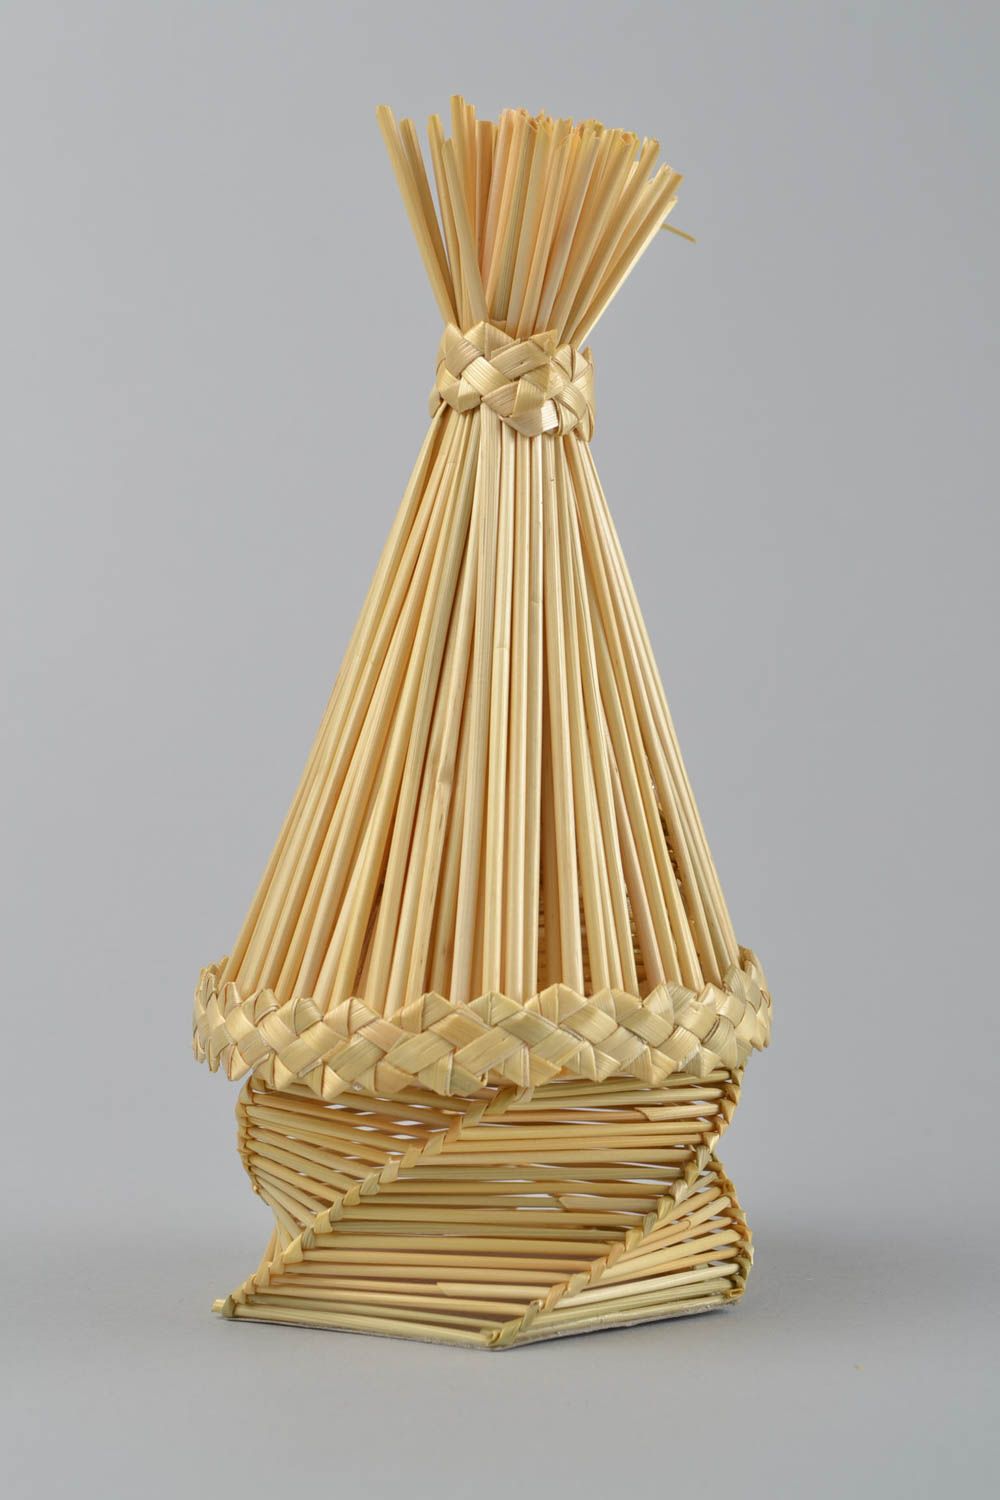 Handmade straw woven decoration in the shape of beehive in ethnic style photo 4